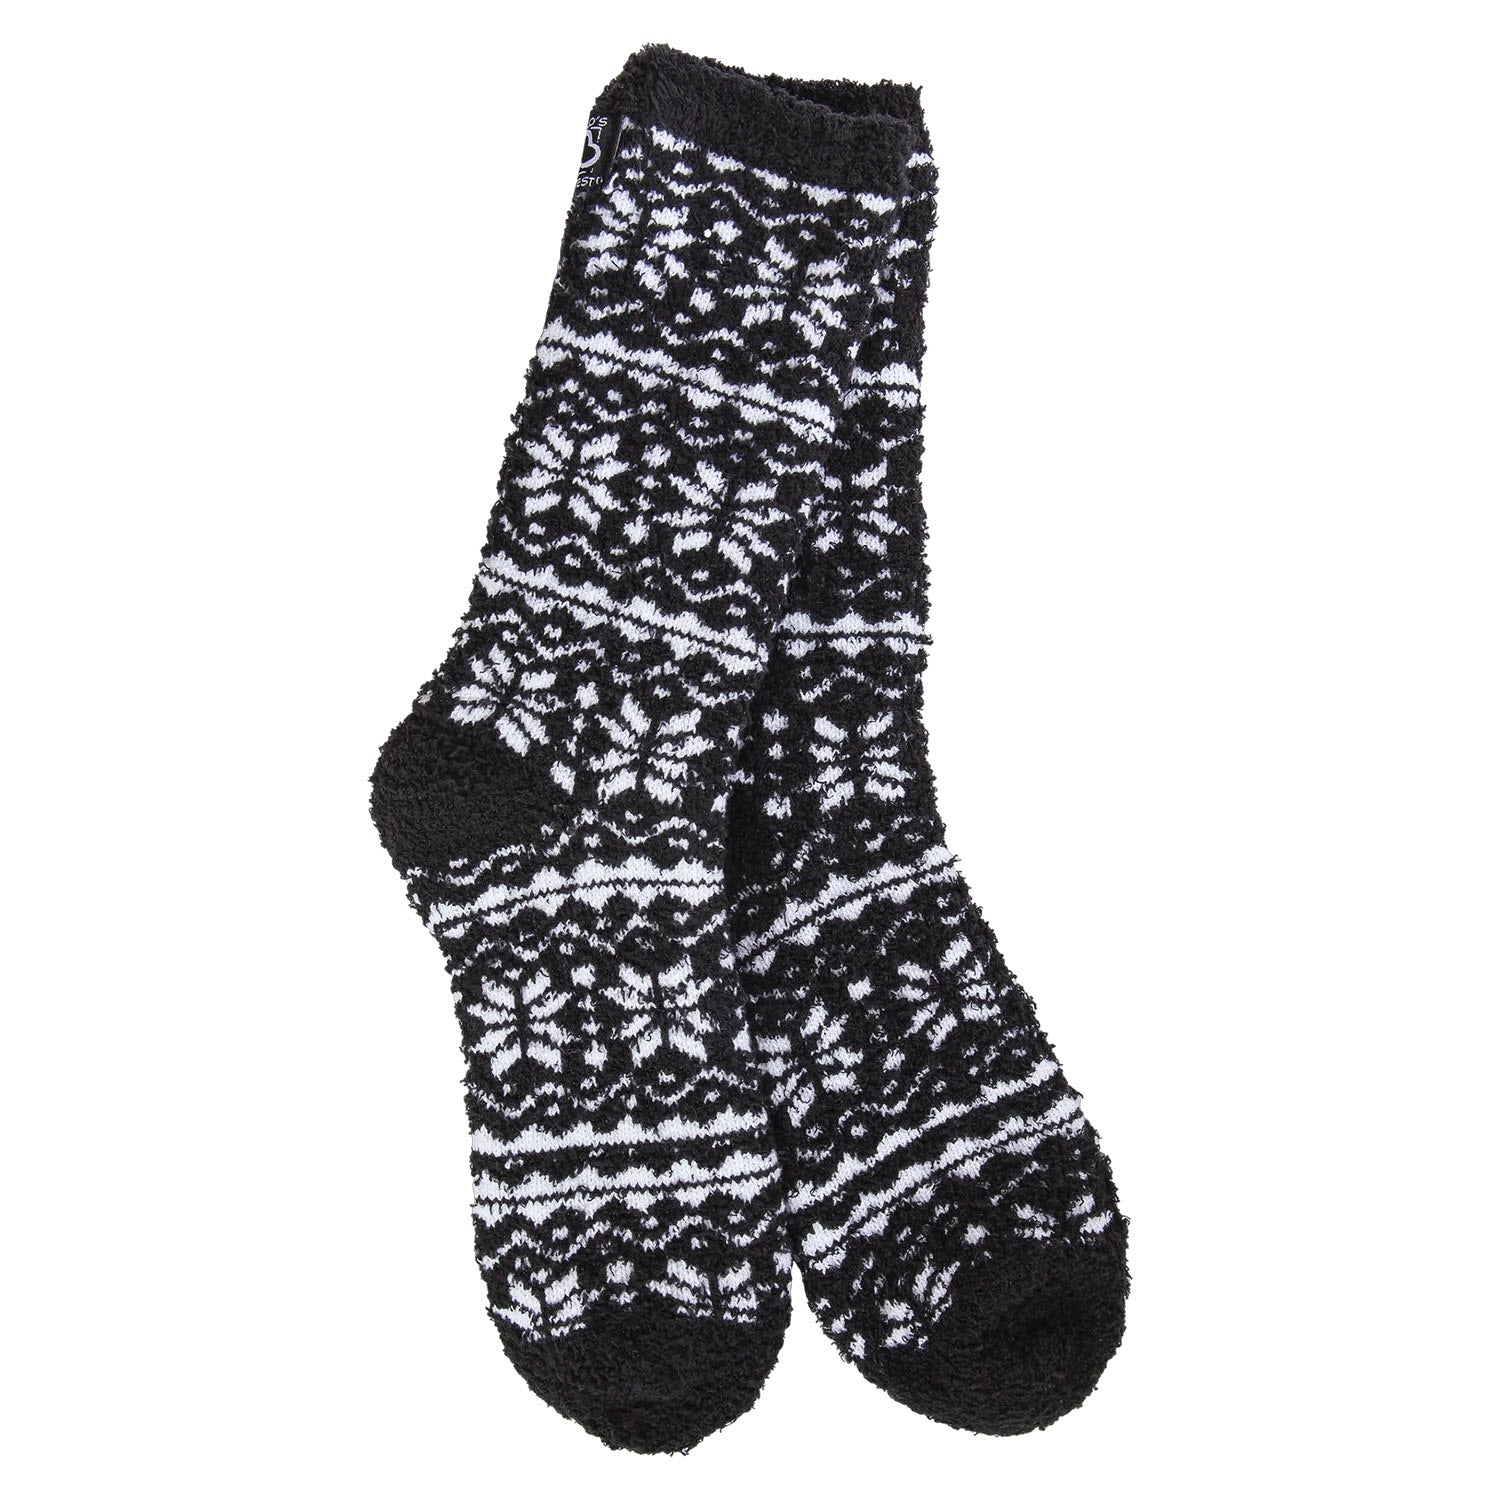 A pair of Worlds Softest Cozy Winter Crew Socks in Fair Isle Black, displayed on a white background.